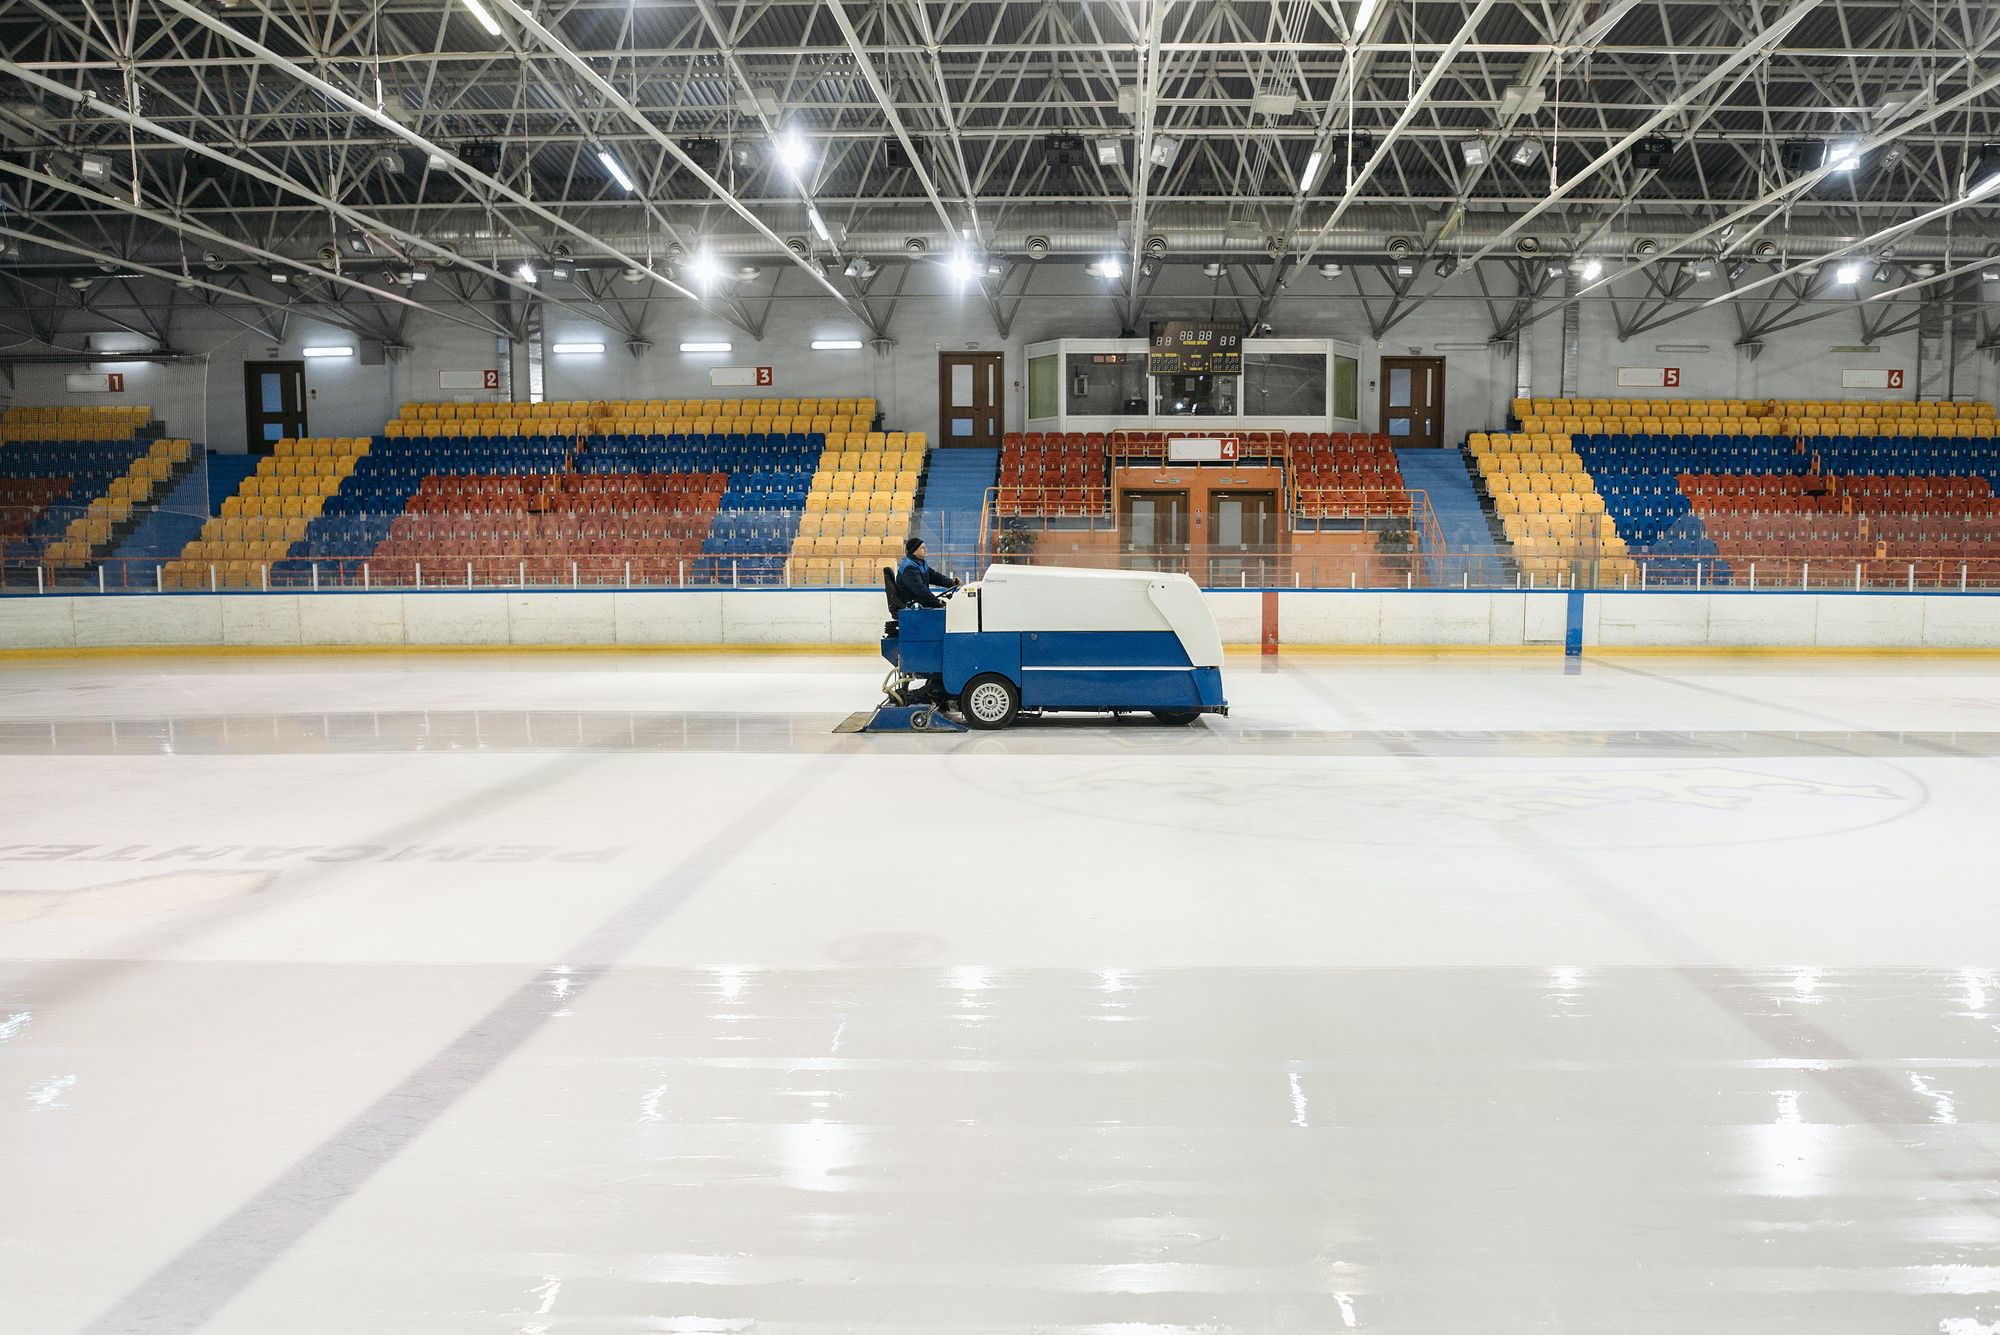 A Zamboni cleaning the ice in a rink